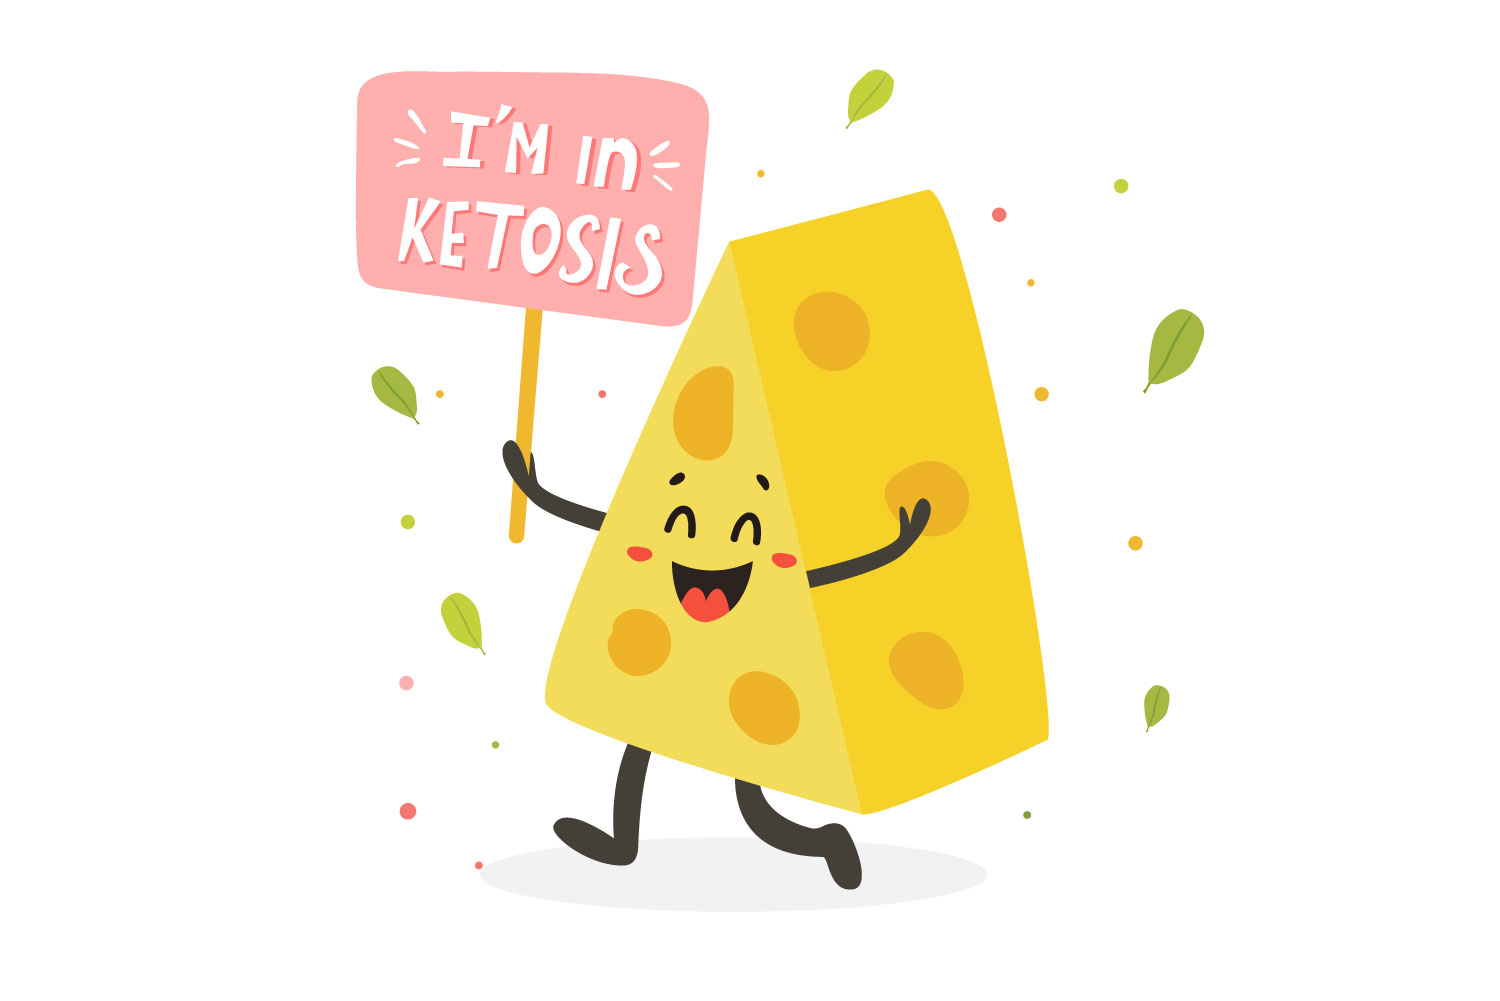 Image about Ketosis and Benefits